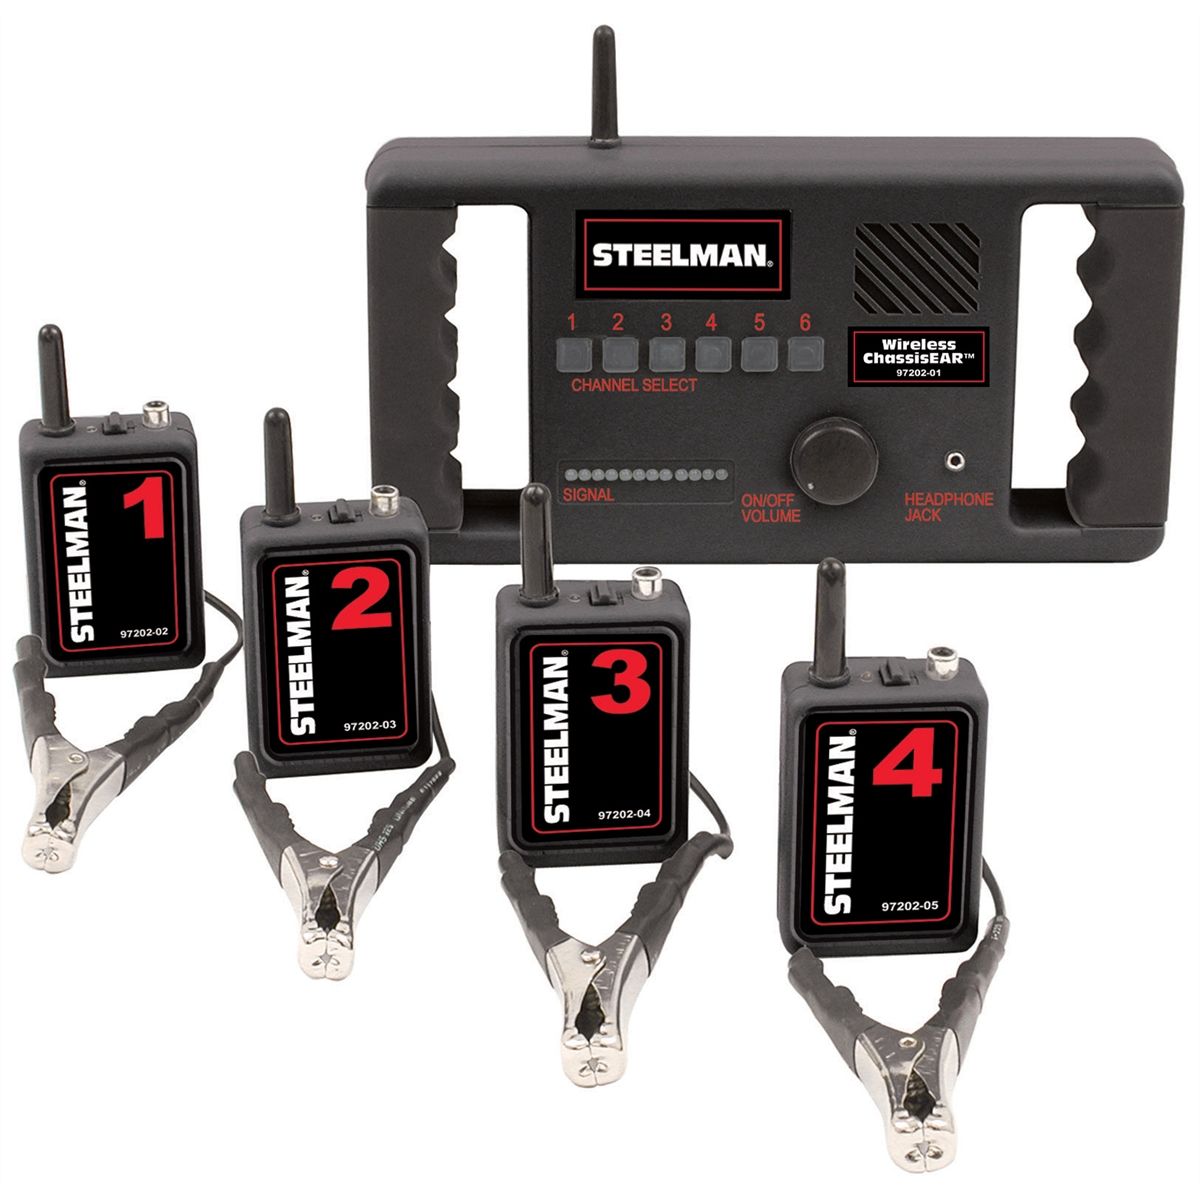 Steelman 97202-02 Replacement Wireless ChassisEAR Transmitter #1 